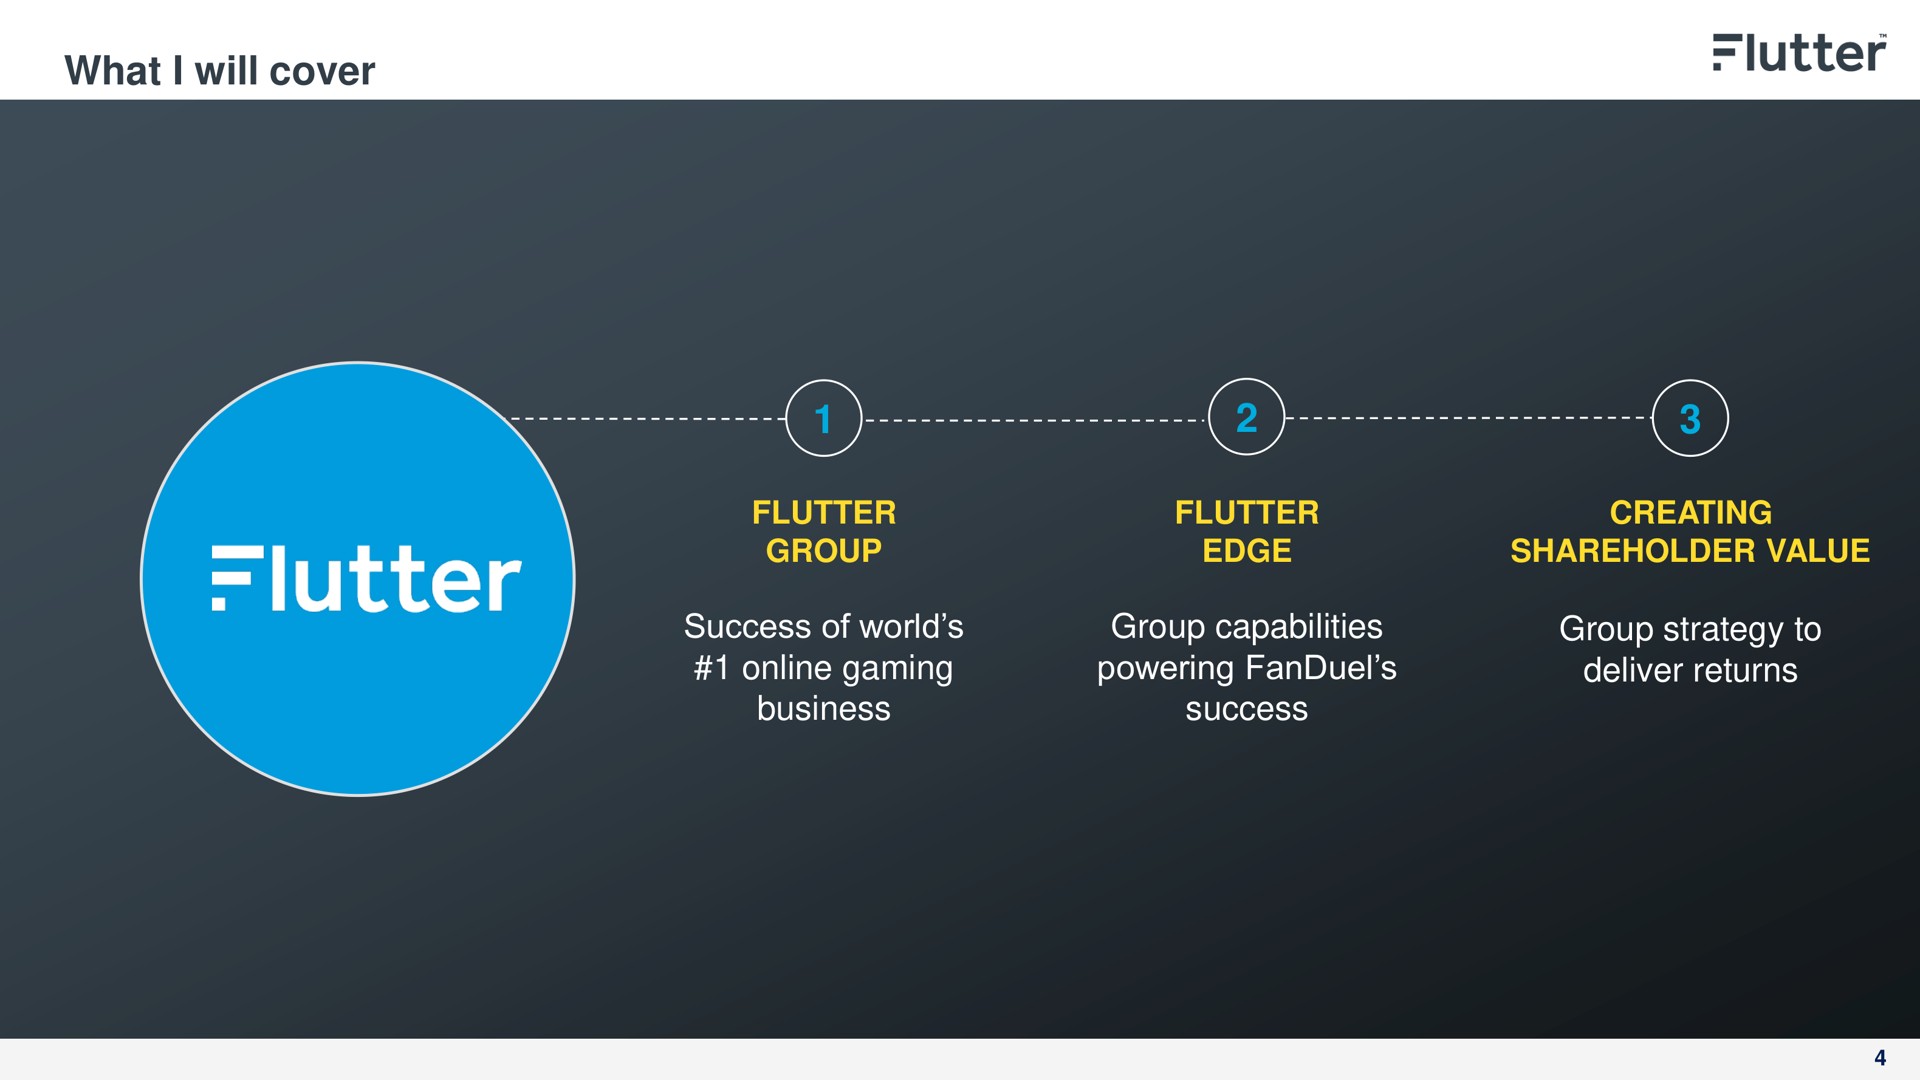 what i will cover success of world gaming business group capabilities powering success group strategy to deliver returns | Flutter